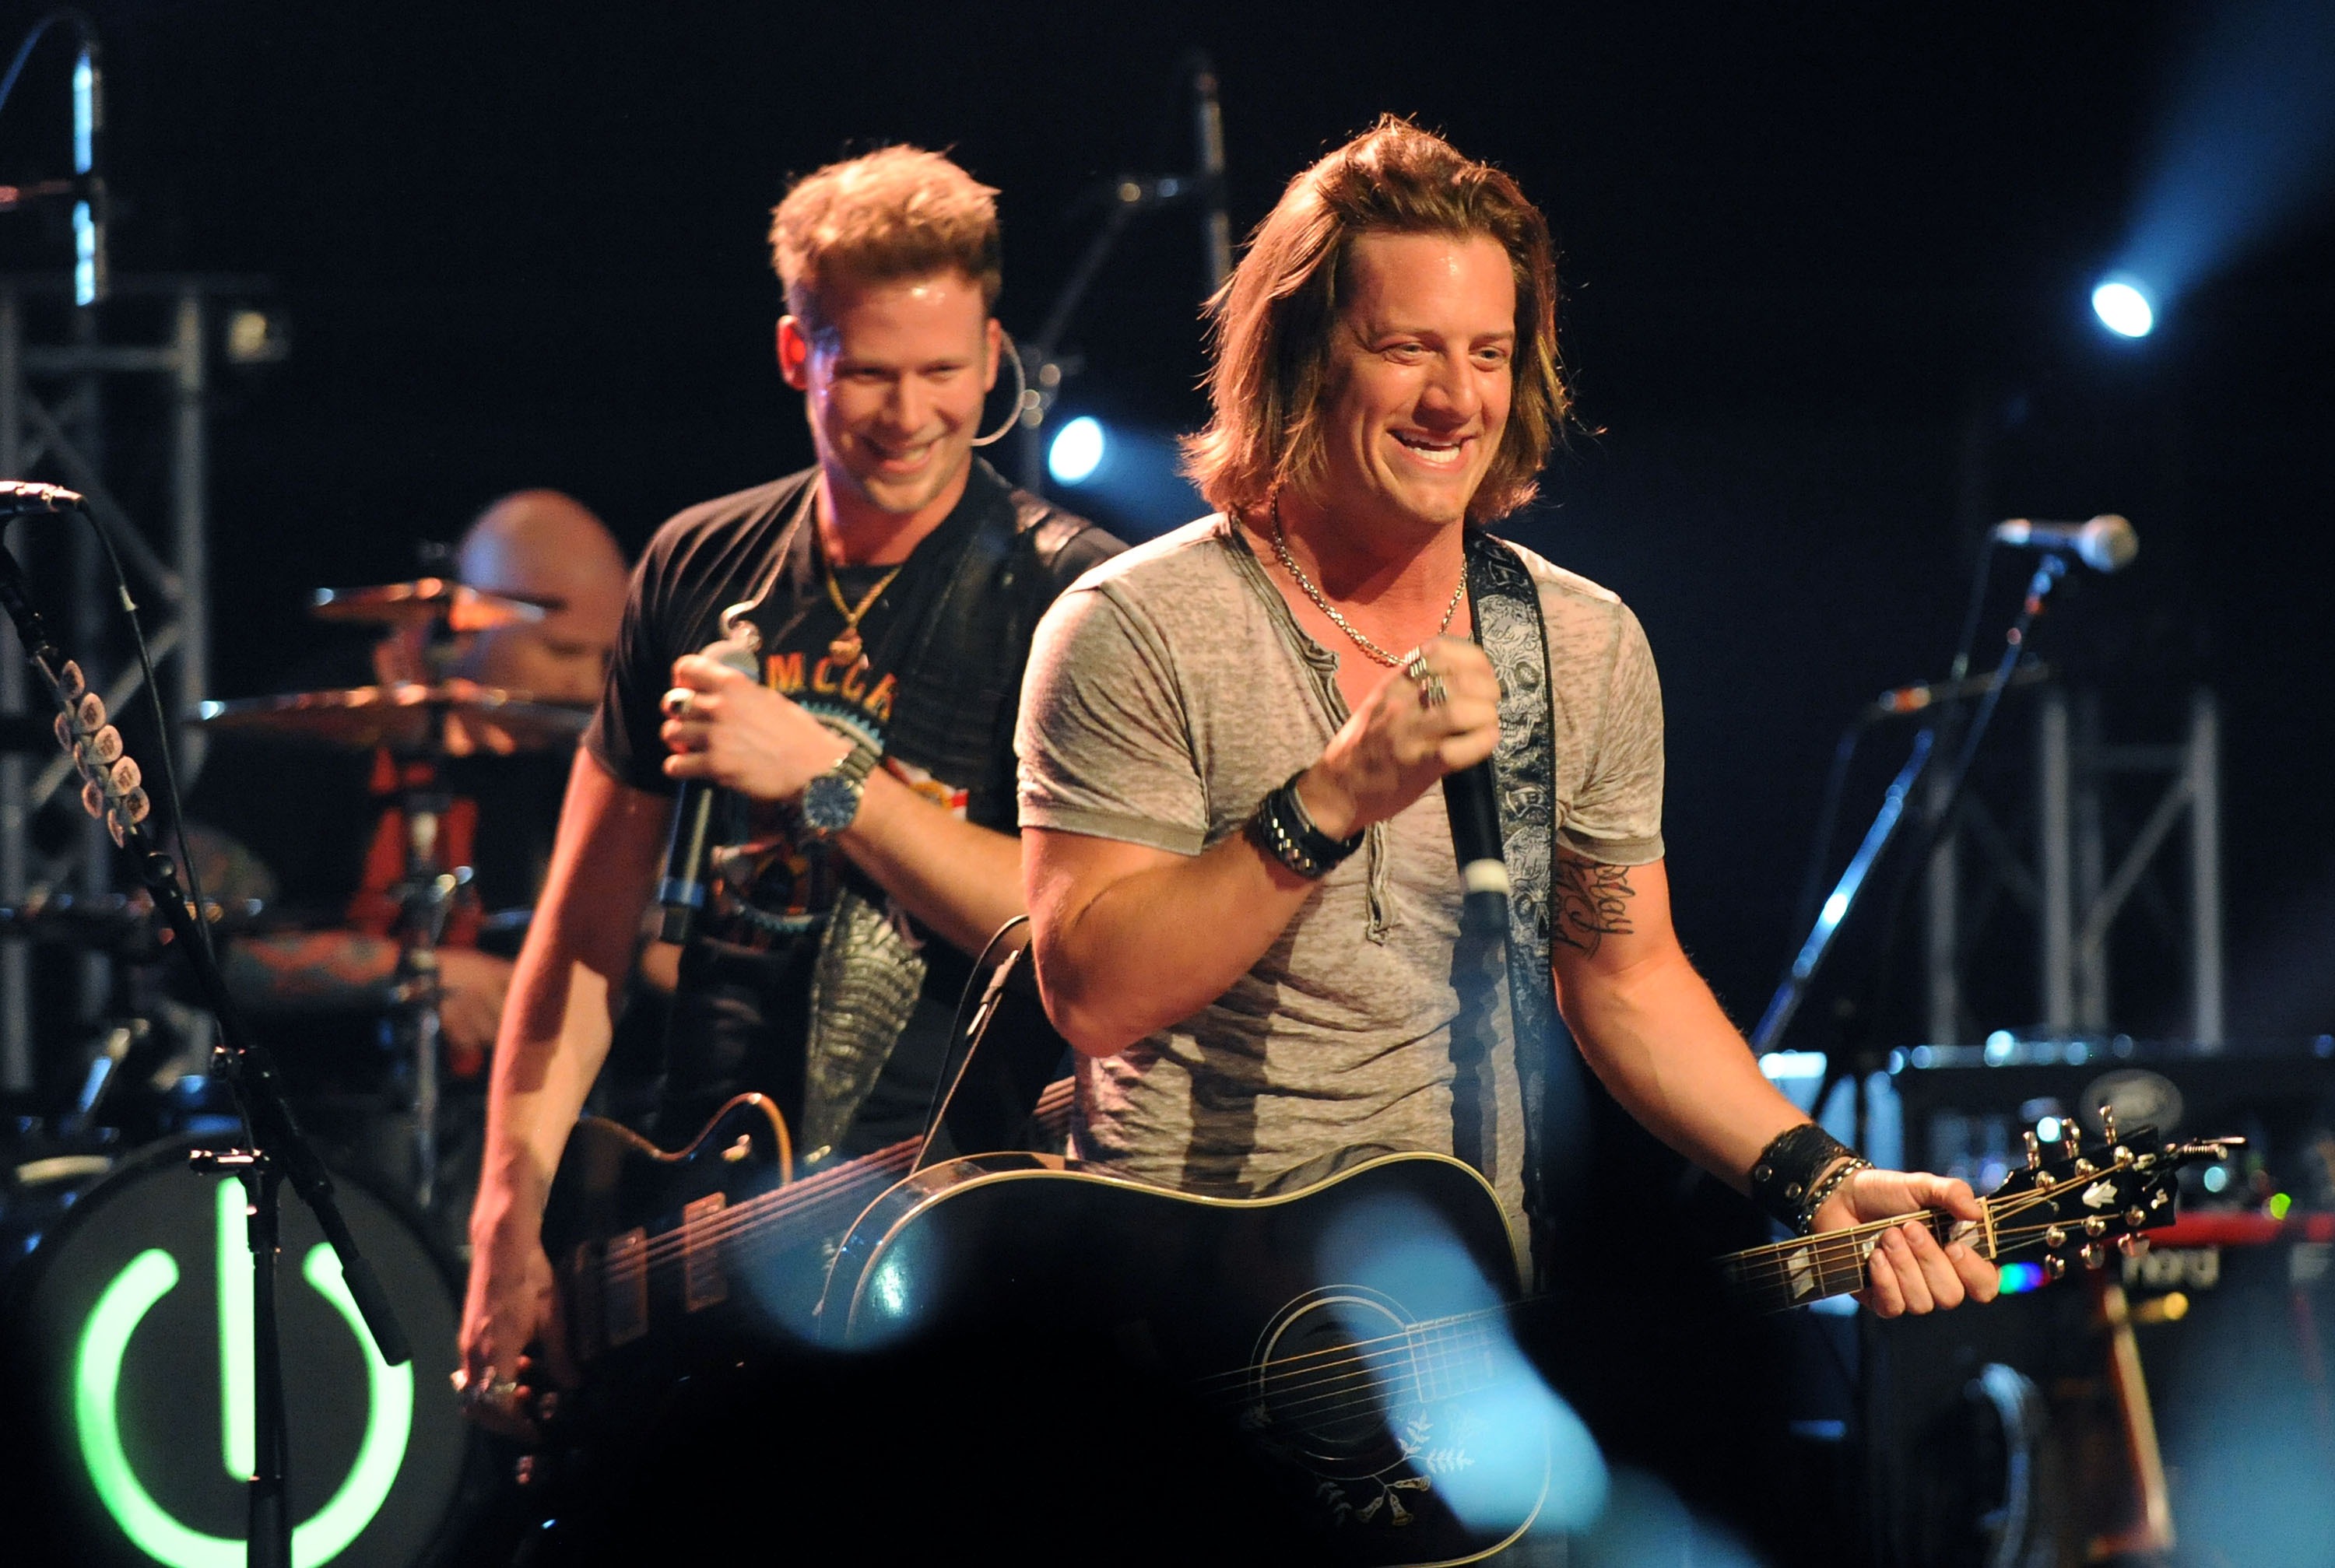 From left: Brian Kelley and Tyler Hubbard of Florida Georgia Line perform at the Georgia Theatre on March 20, 2013 in Athens, Ga.